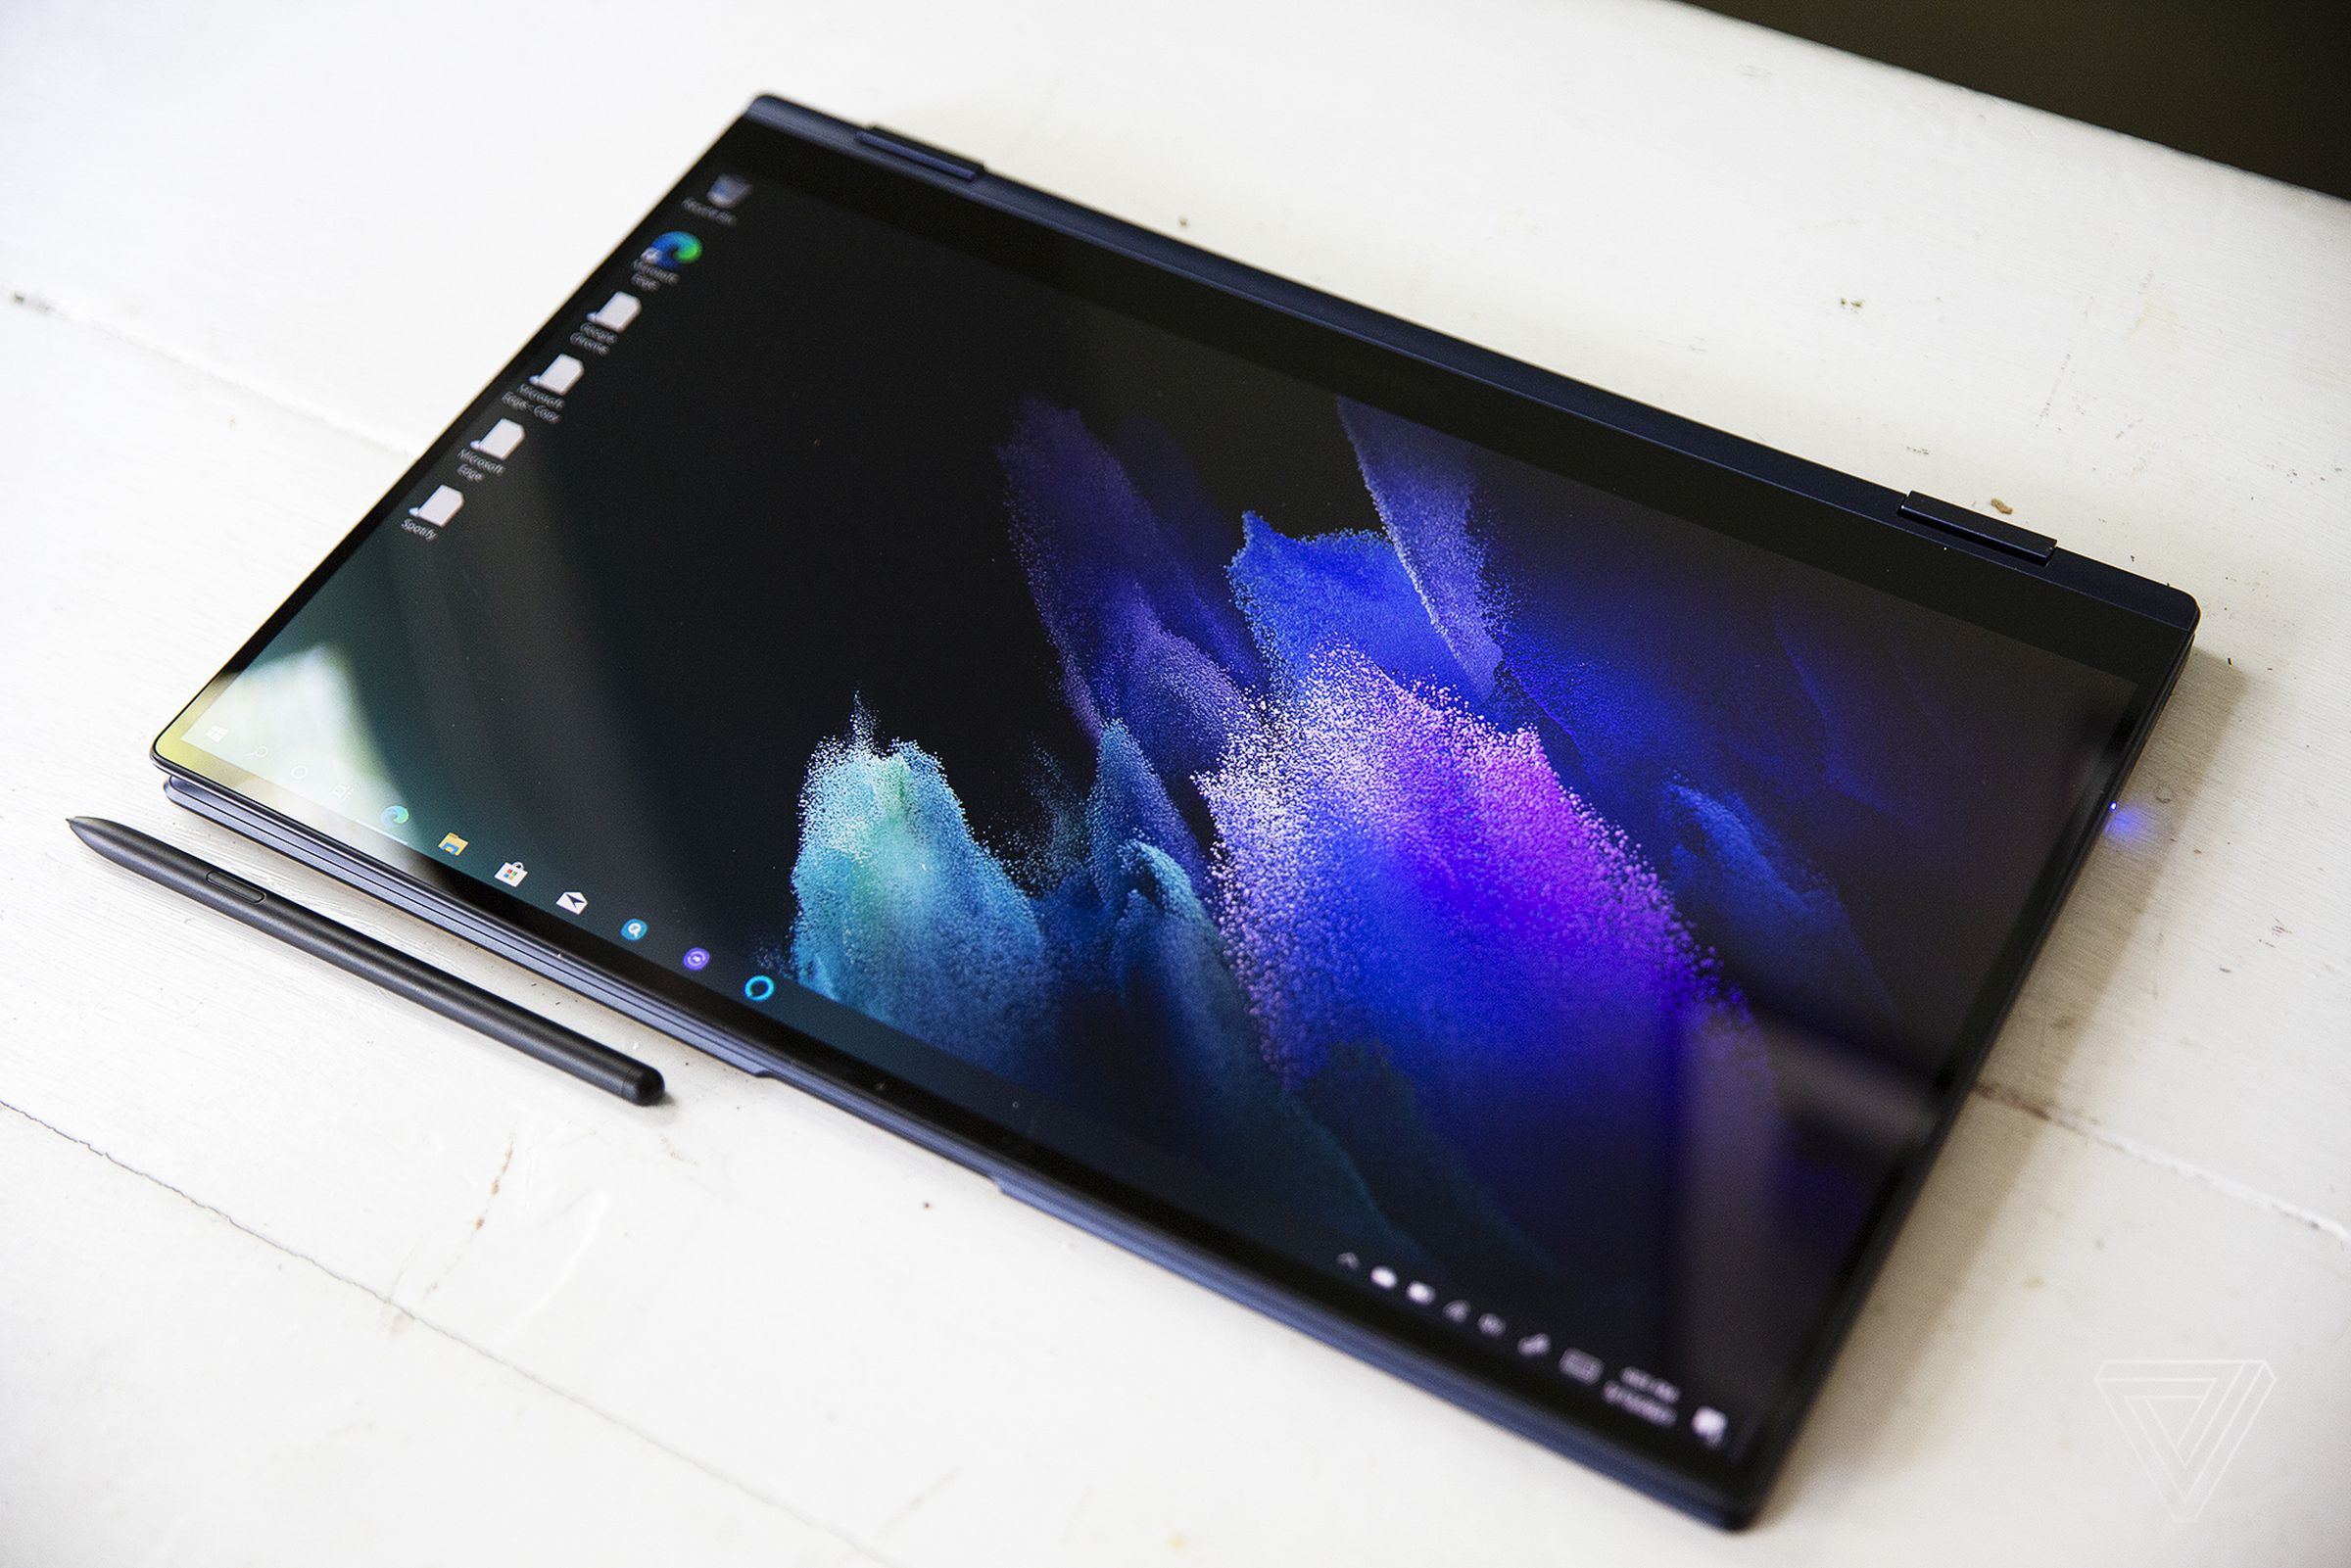 The Samsung Galaxy Book Pro 360 (15-inch) in tablet mode with the stylus below it on a white table. The screen displays a purple pastel pattern on a dark background.